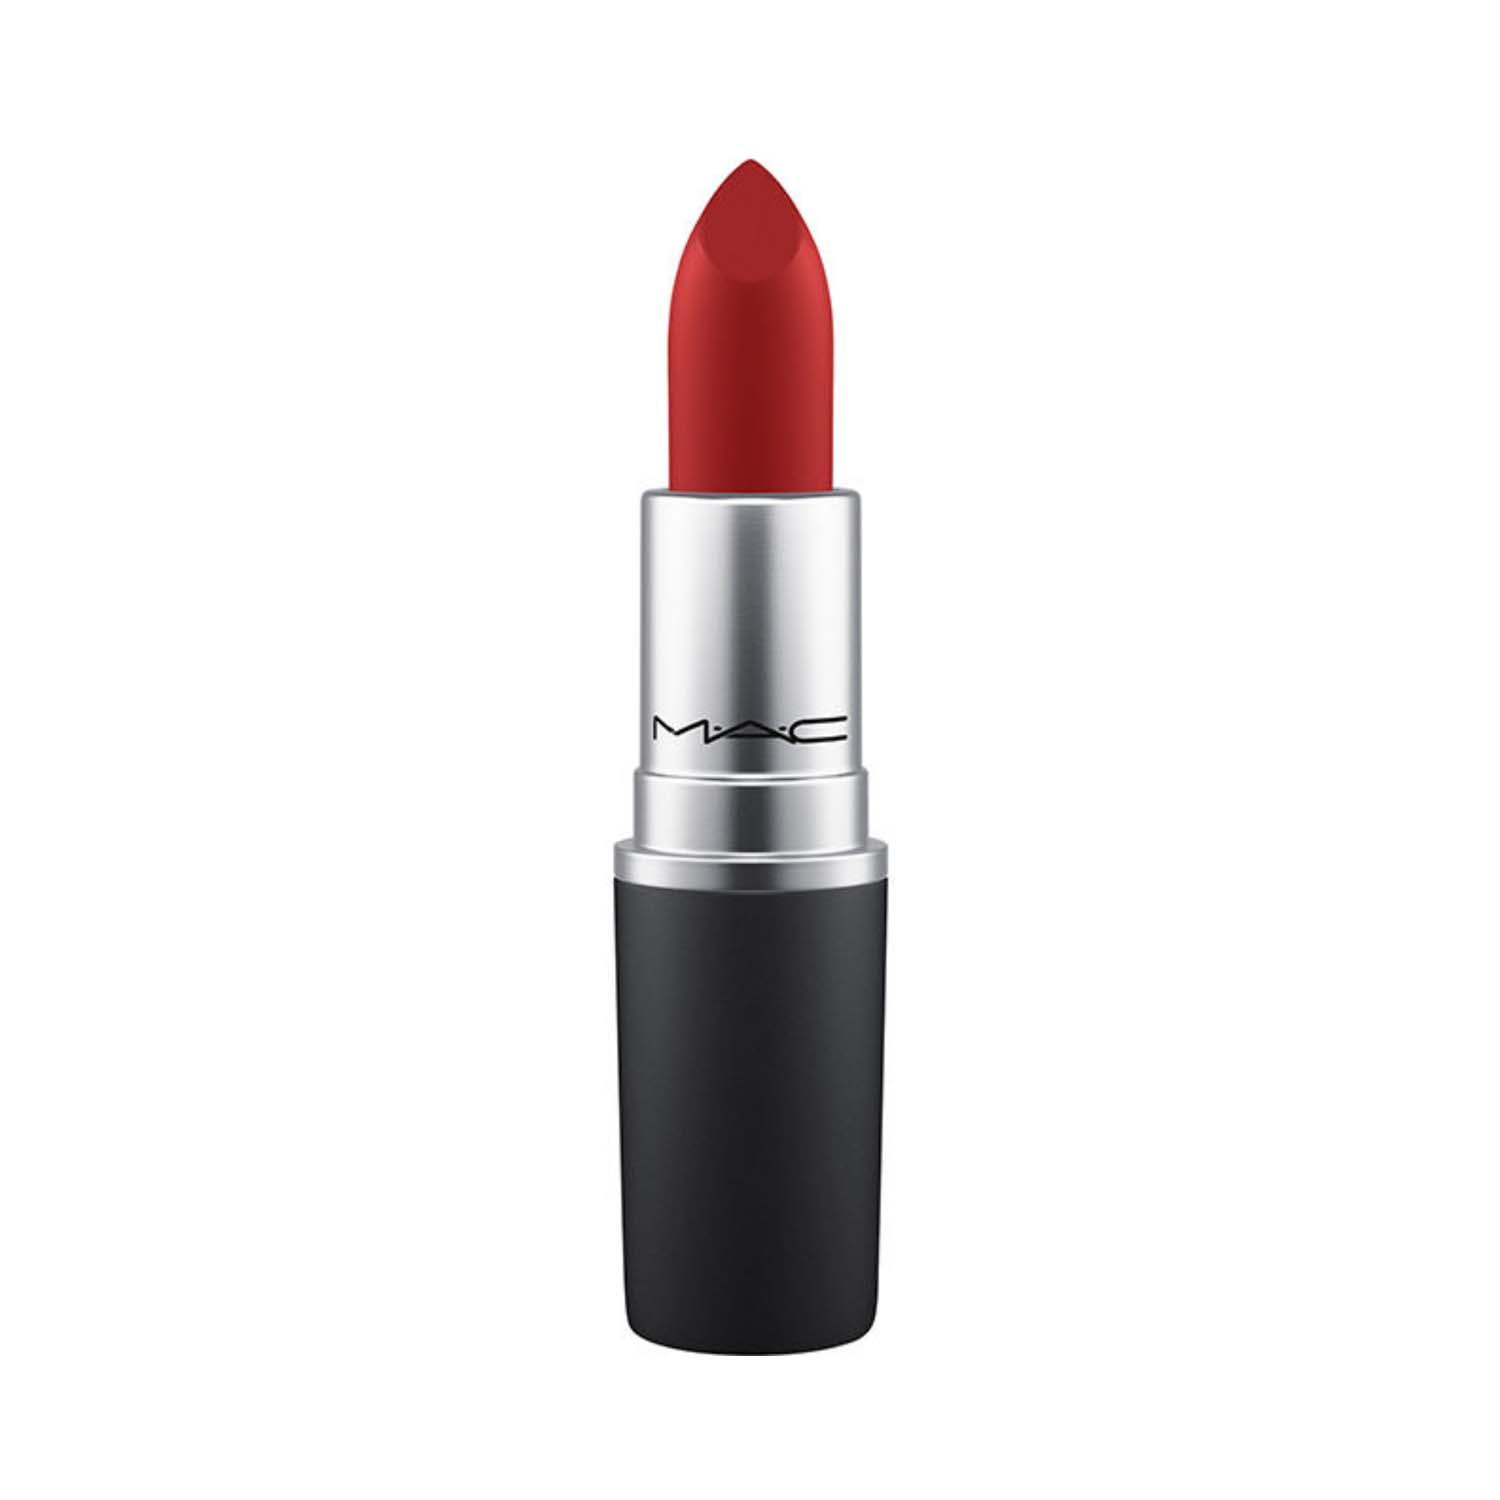 M.A.C | M.A.C Powder Kiss Lipstick - Healthy, Wealthy And Thriving (3g)